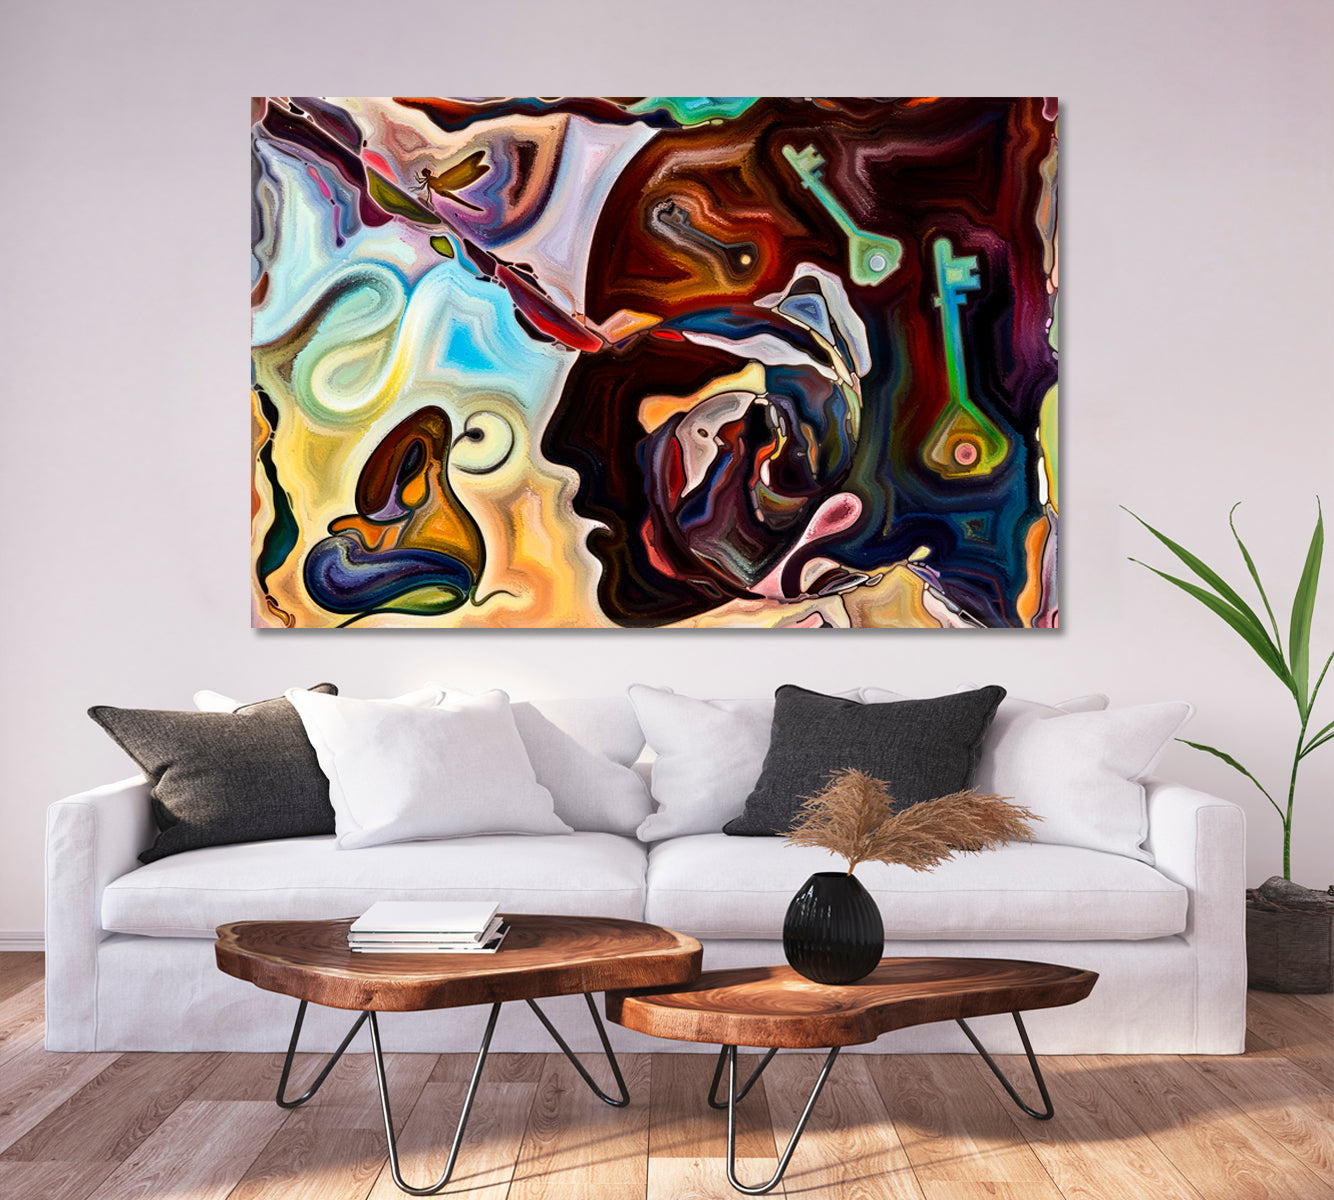 LIVES AND LIFE INSIDE A PAINTING Colorful Abstract Shapes Consciousness Art Artesty 1 panel 24" x 16" 